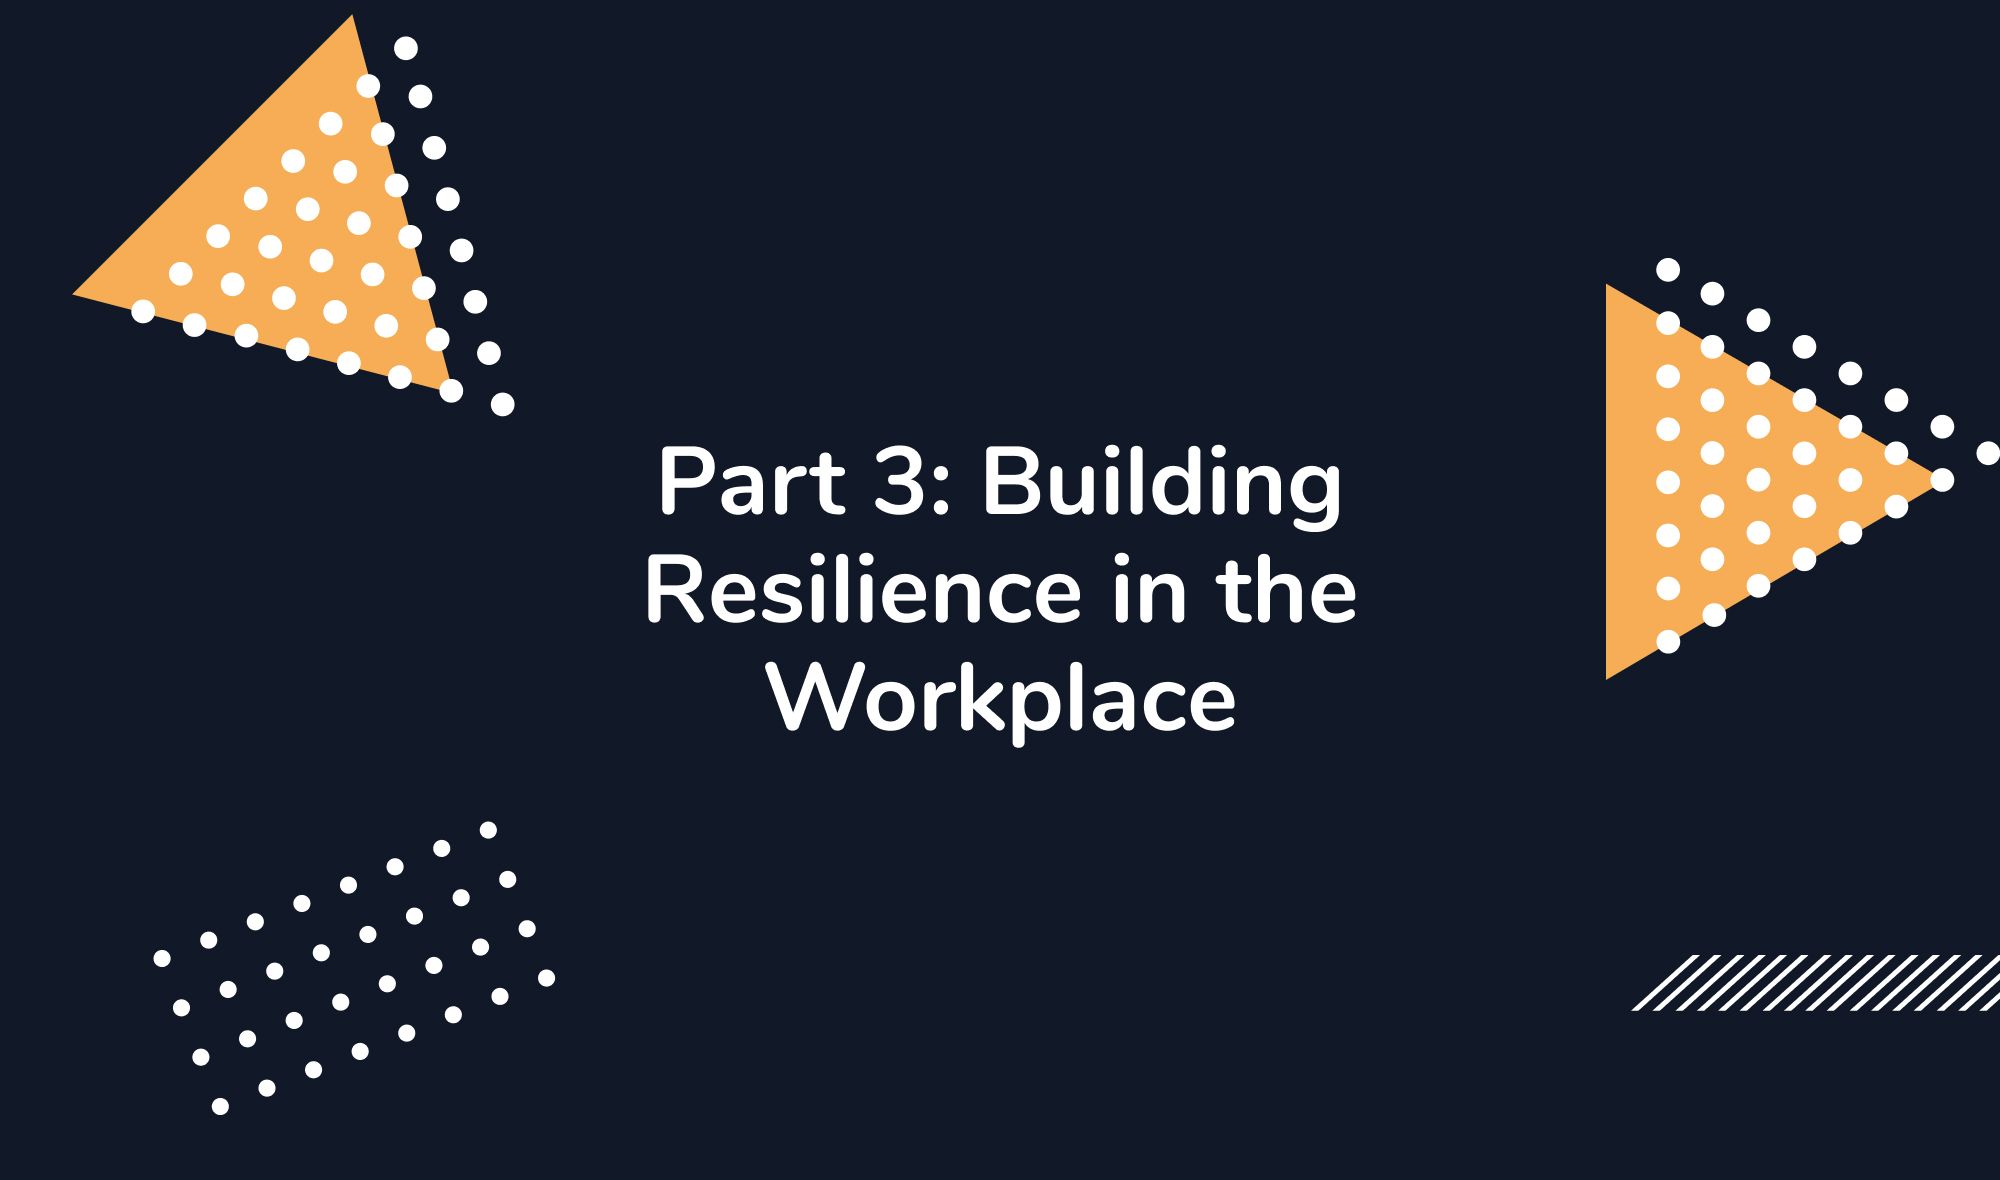 Part 3: Building Resilience in the Workplace